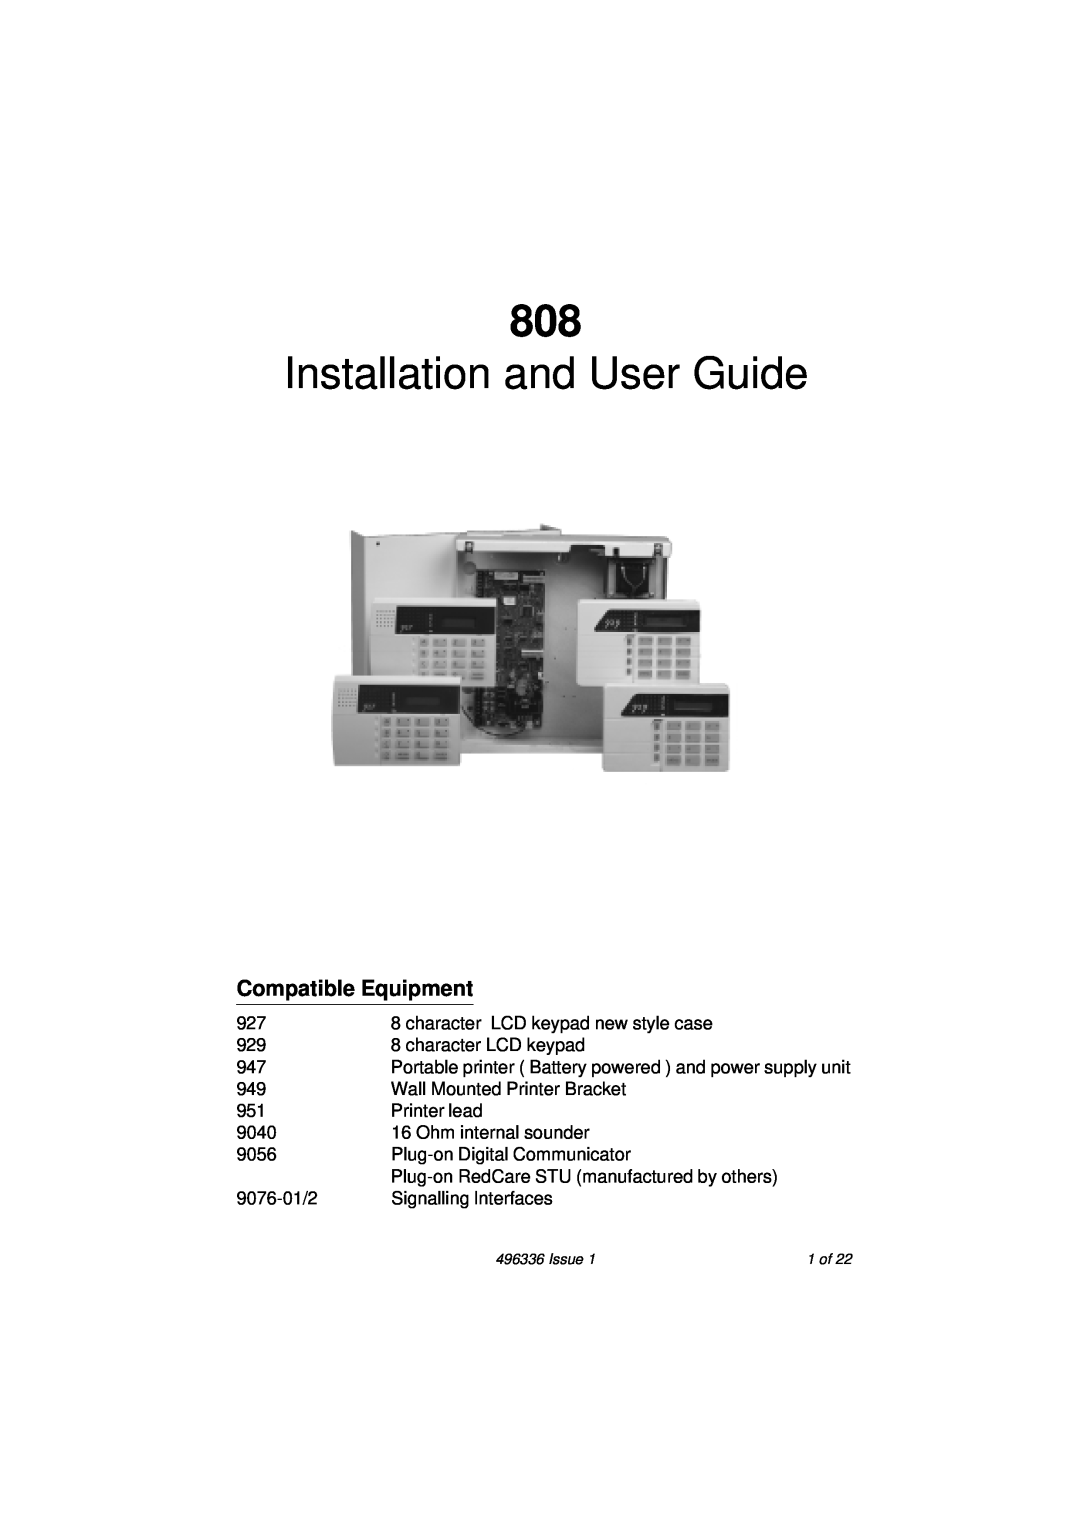 Security Centres 808 manual Compatible Equipment, Installation and User Guide 